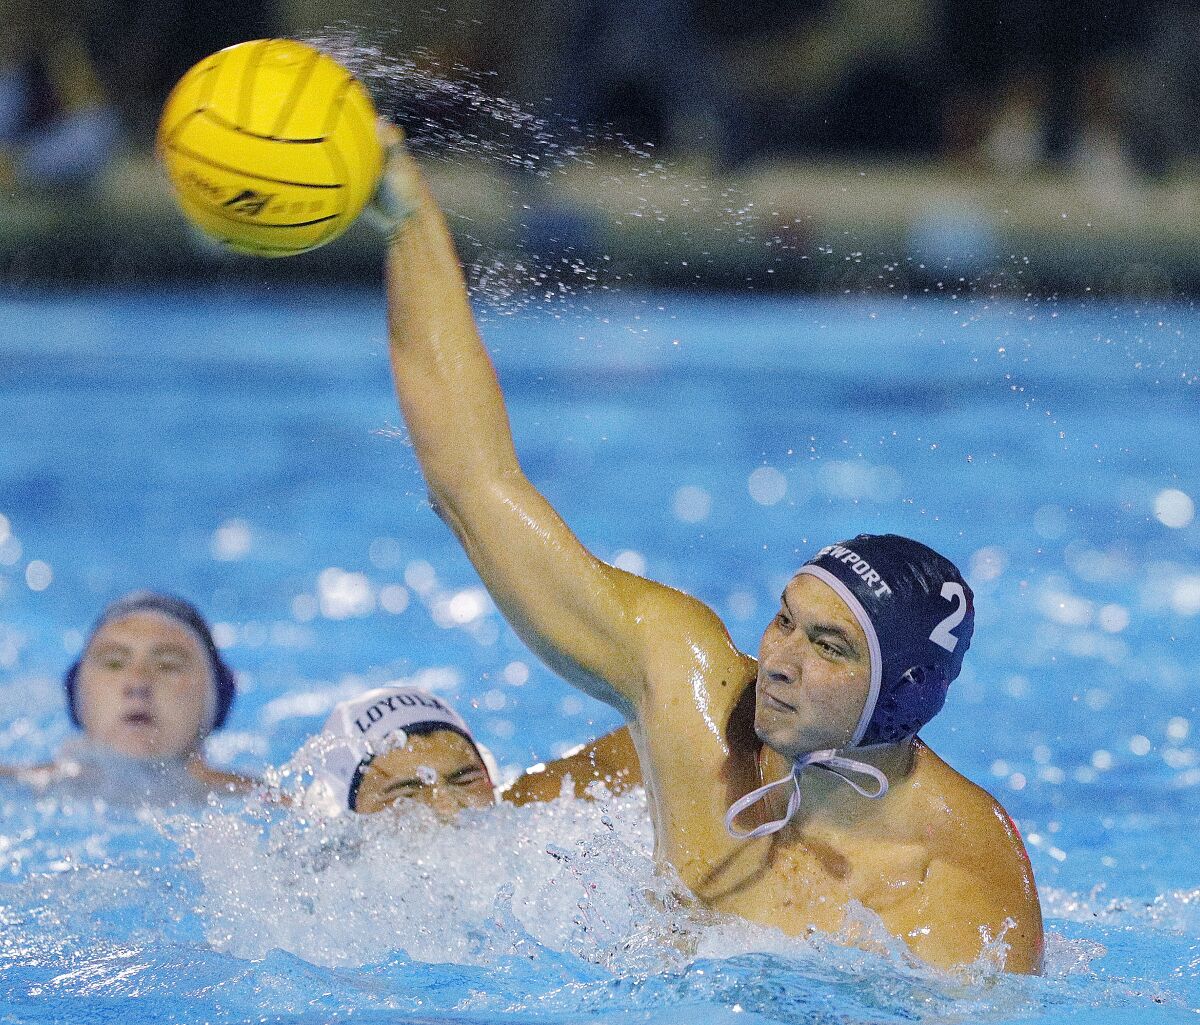 UCLA freshman Mo Kenney, shown playing high school water polo with Newport Harbor in 2019.